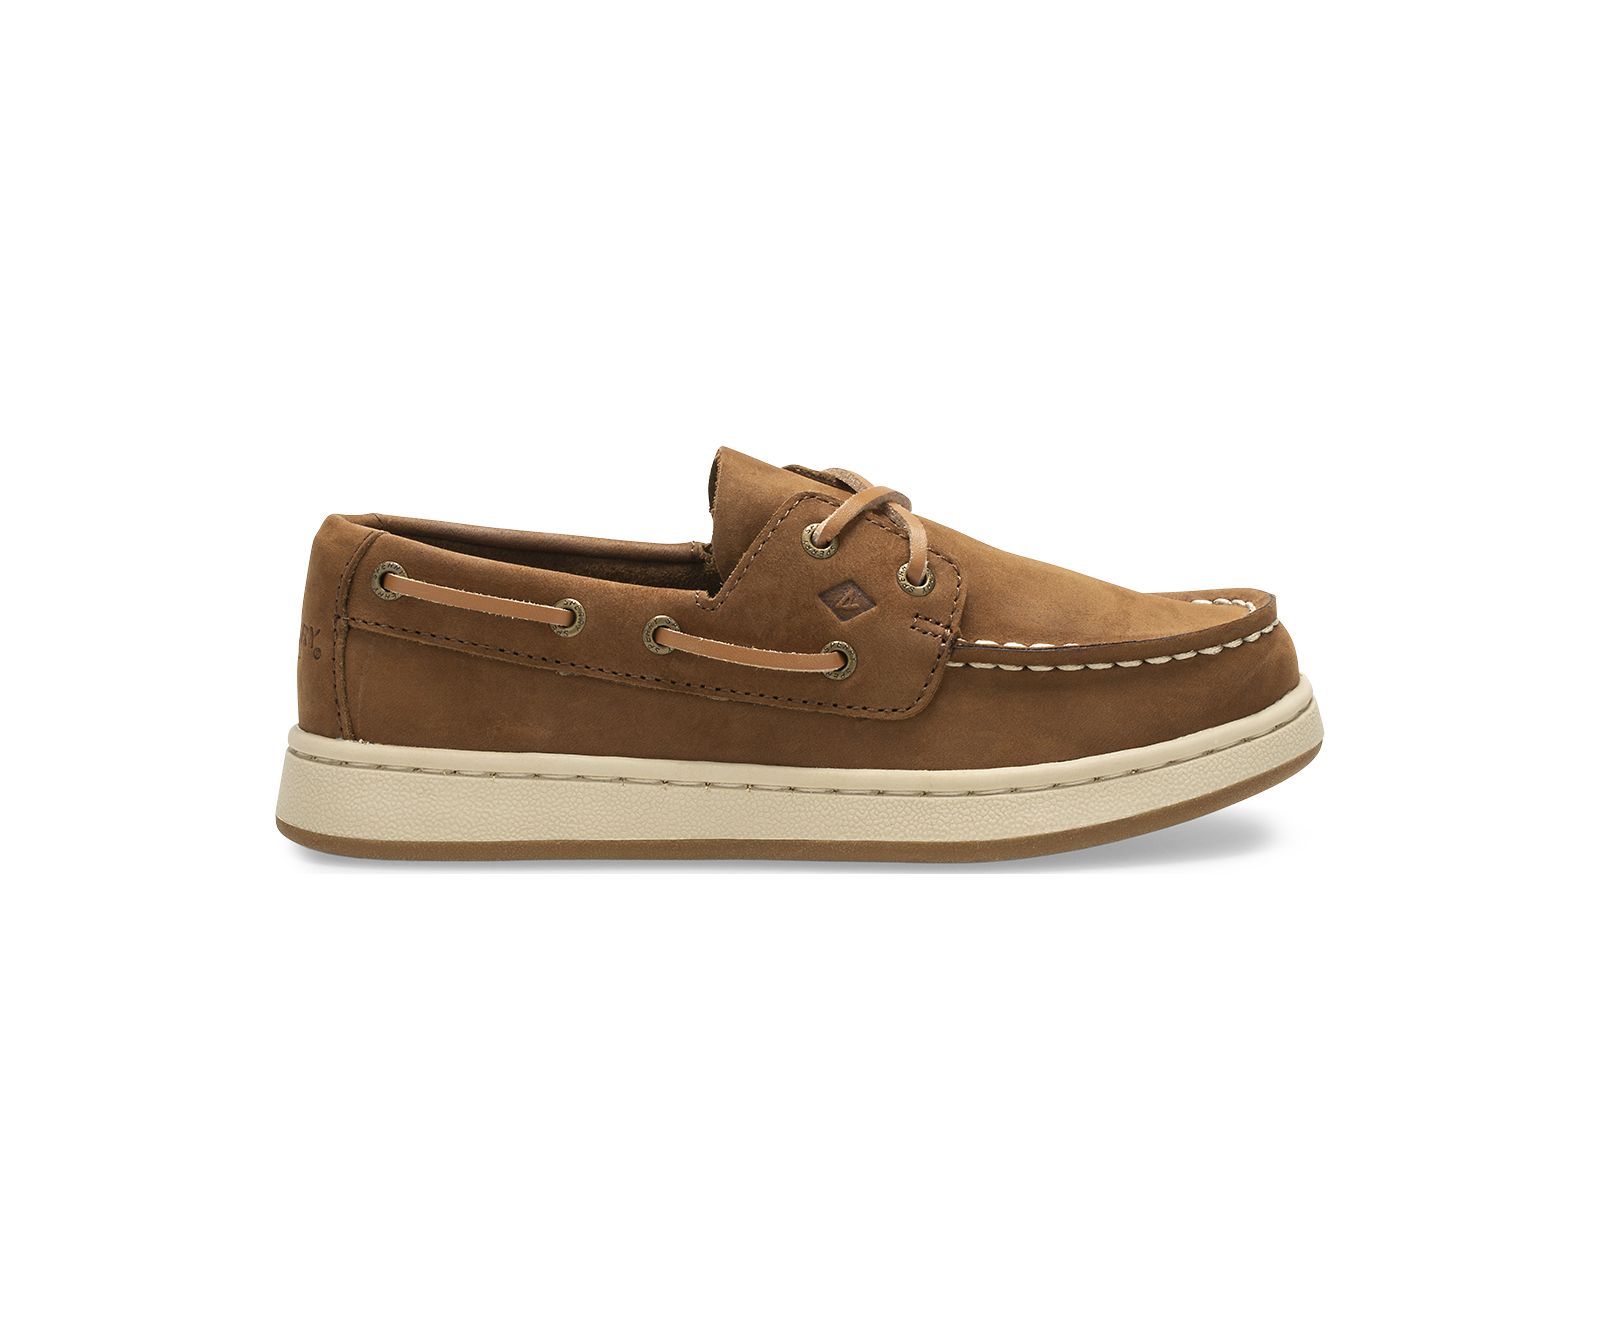 Big Kid's Sperry Cup II Boat Shoe - Brown - Click Image to Close